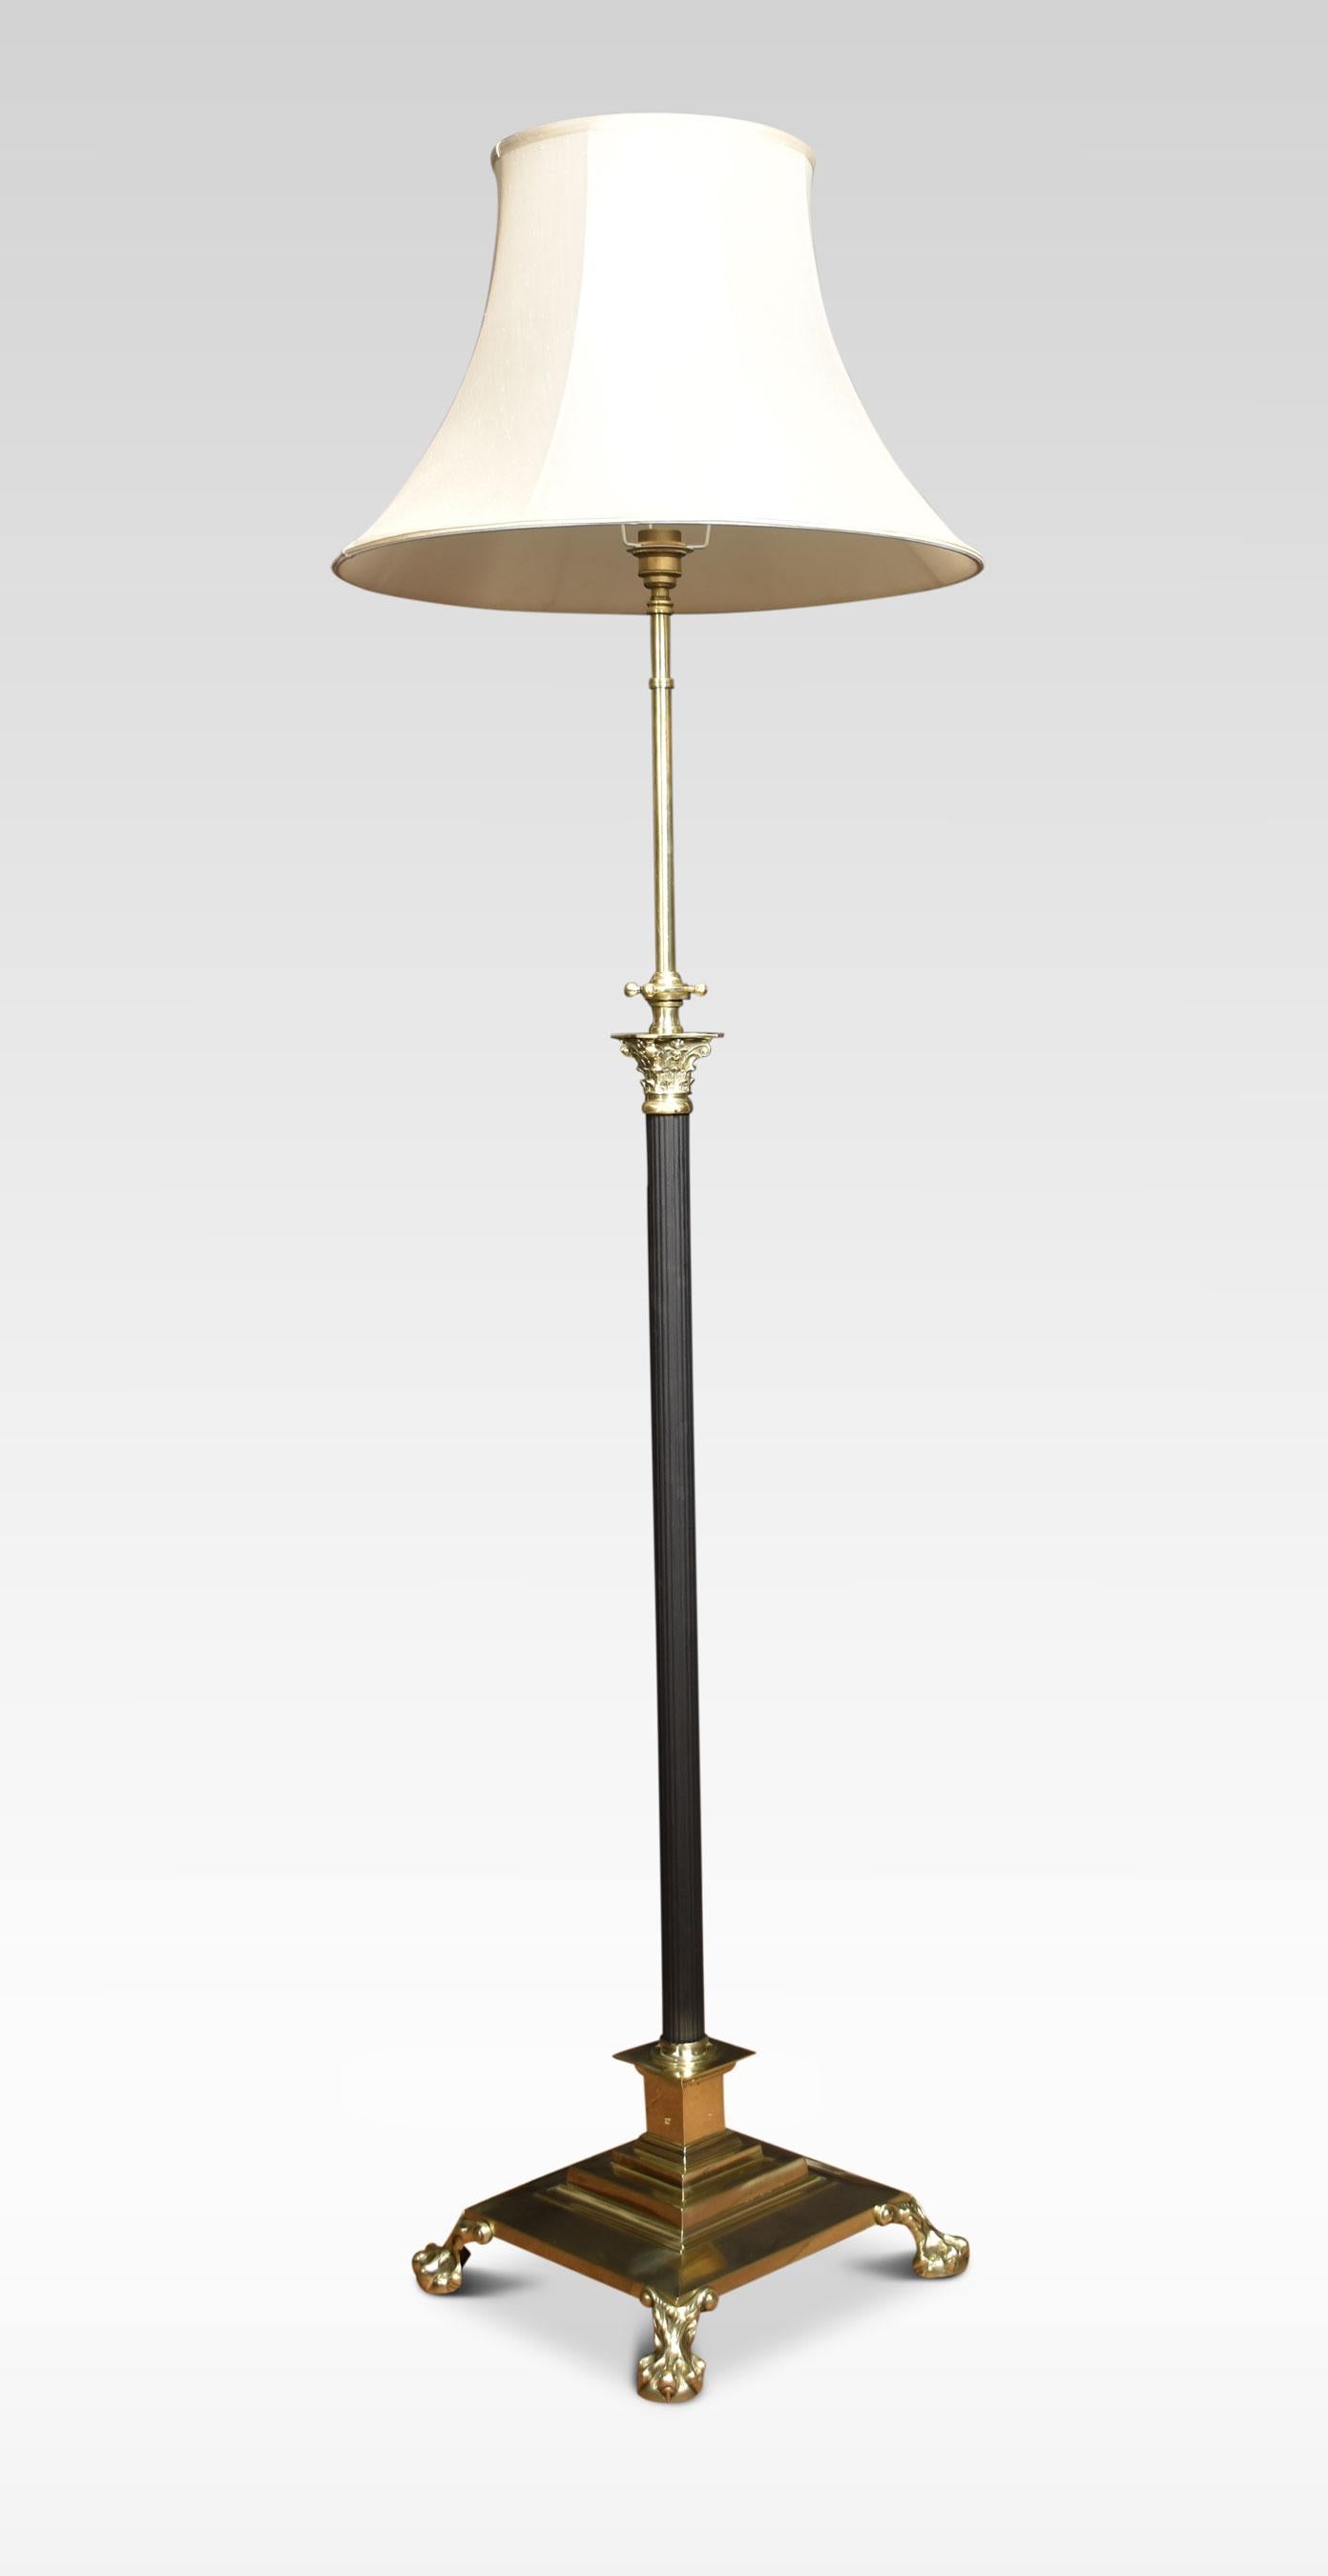 19th century brass standard lamp. Having ebonized Corinthian column and adjustable stem, on a stepped square base with paw feet.
Dimensions
Height 52 Inches adjustable to 79 inches
Width 14.5 inches
Depth 14.5 inches.